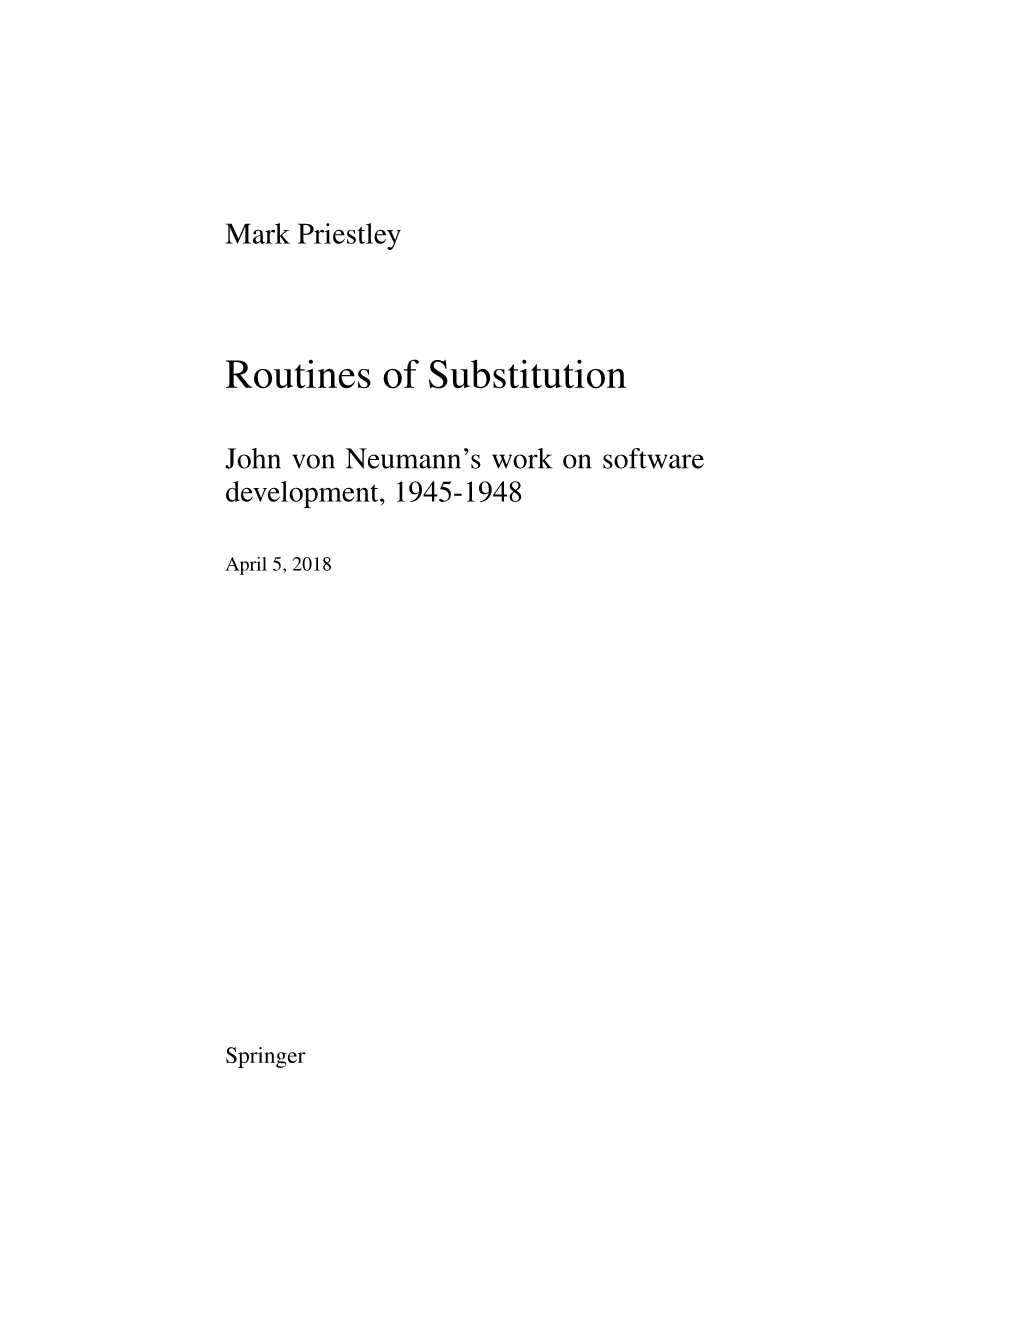 Routines of Substitution